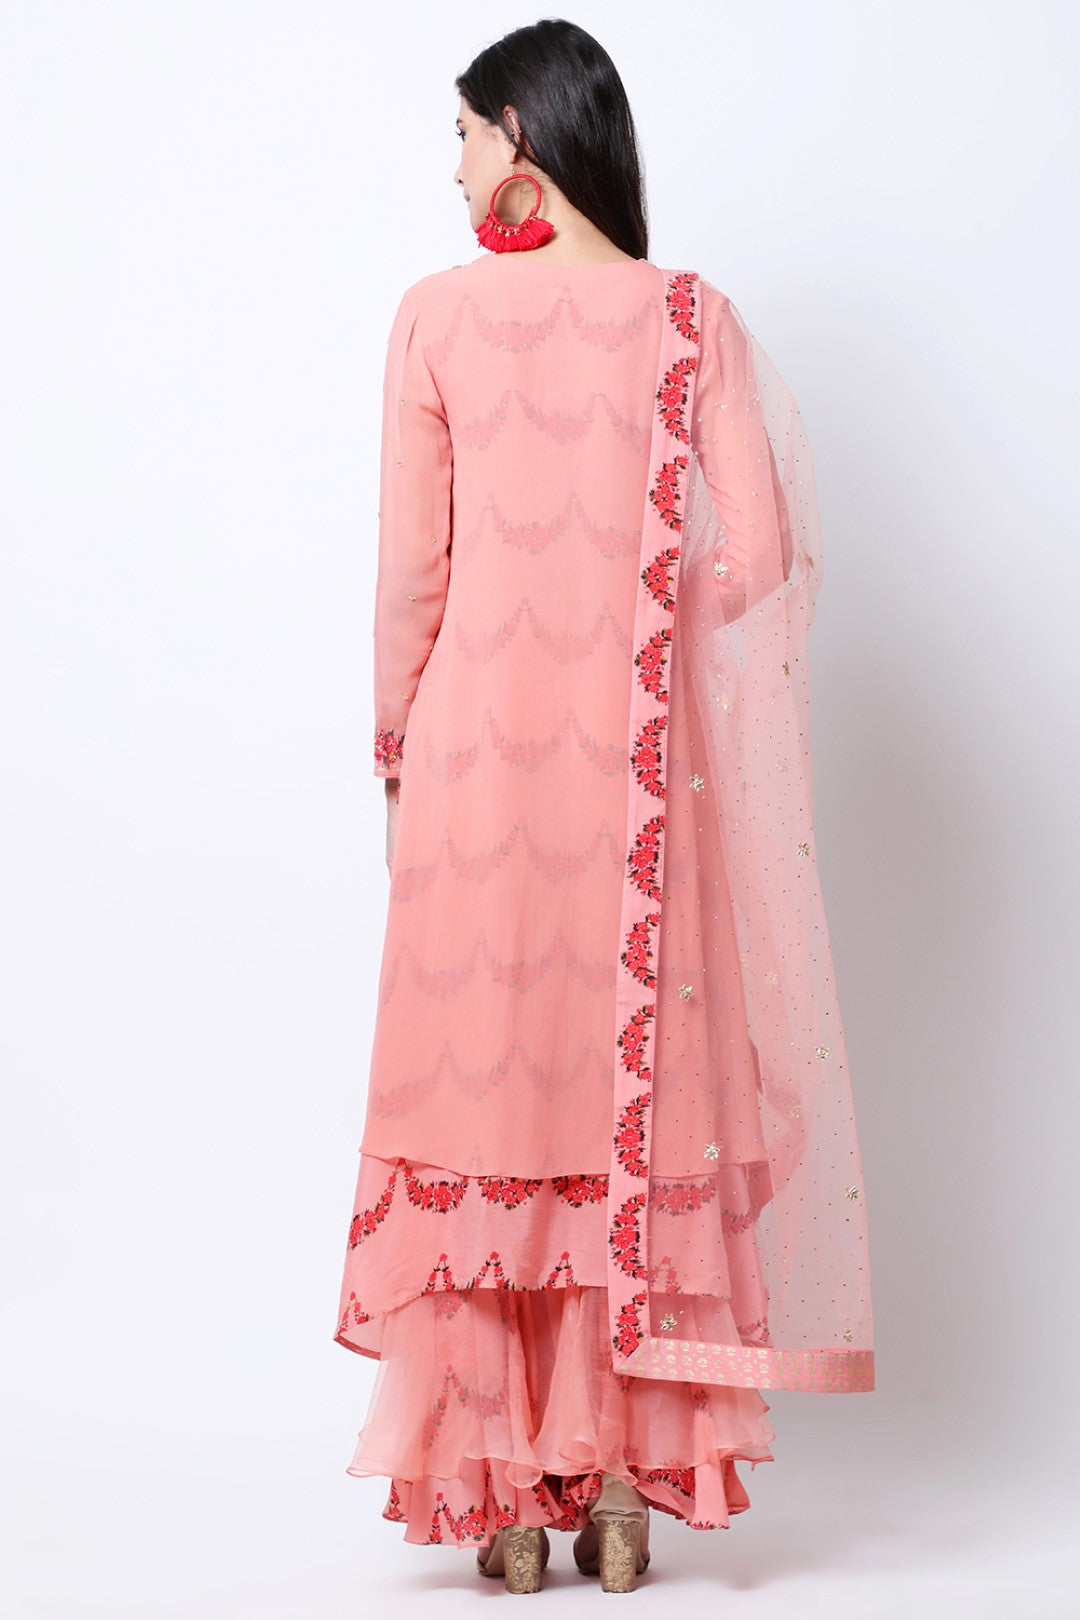 Vintage Rose scallop double layered embellished asymmetric tunic with mukesh net dupatta and sharara.